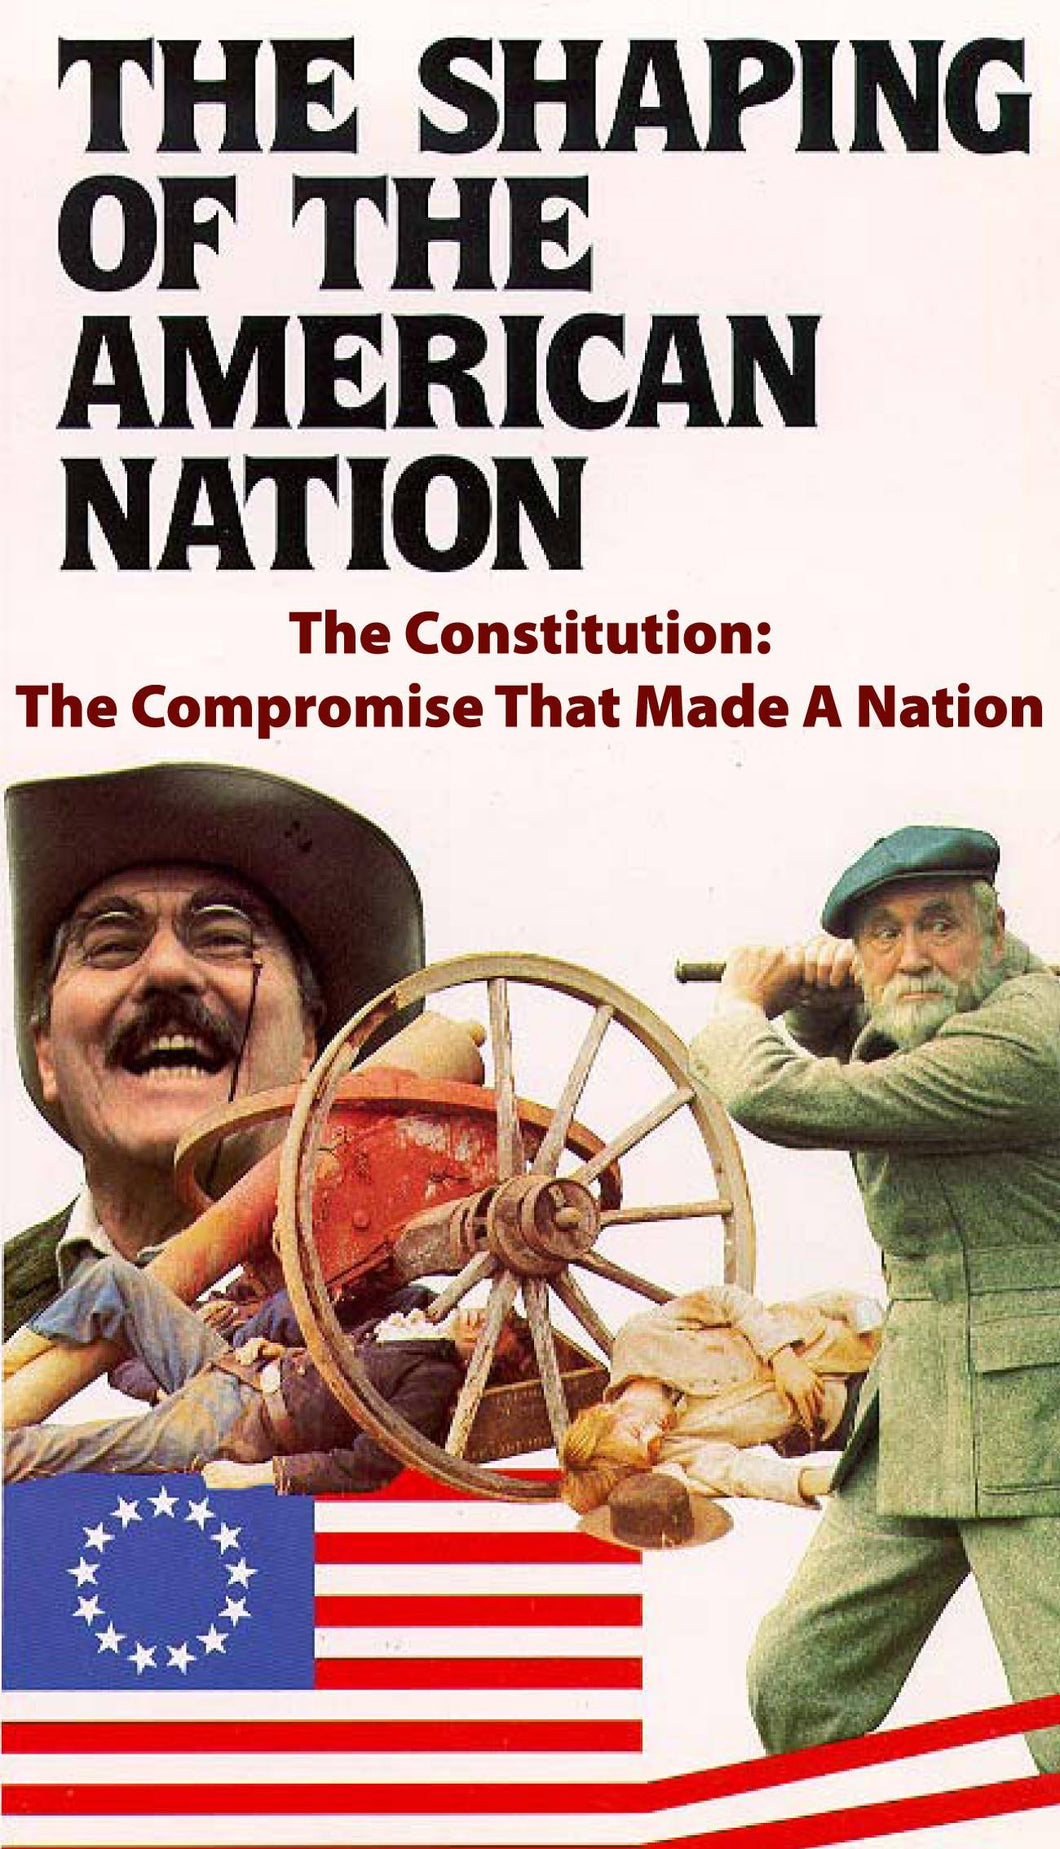 Constitution: Compromise That Made a Nation